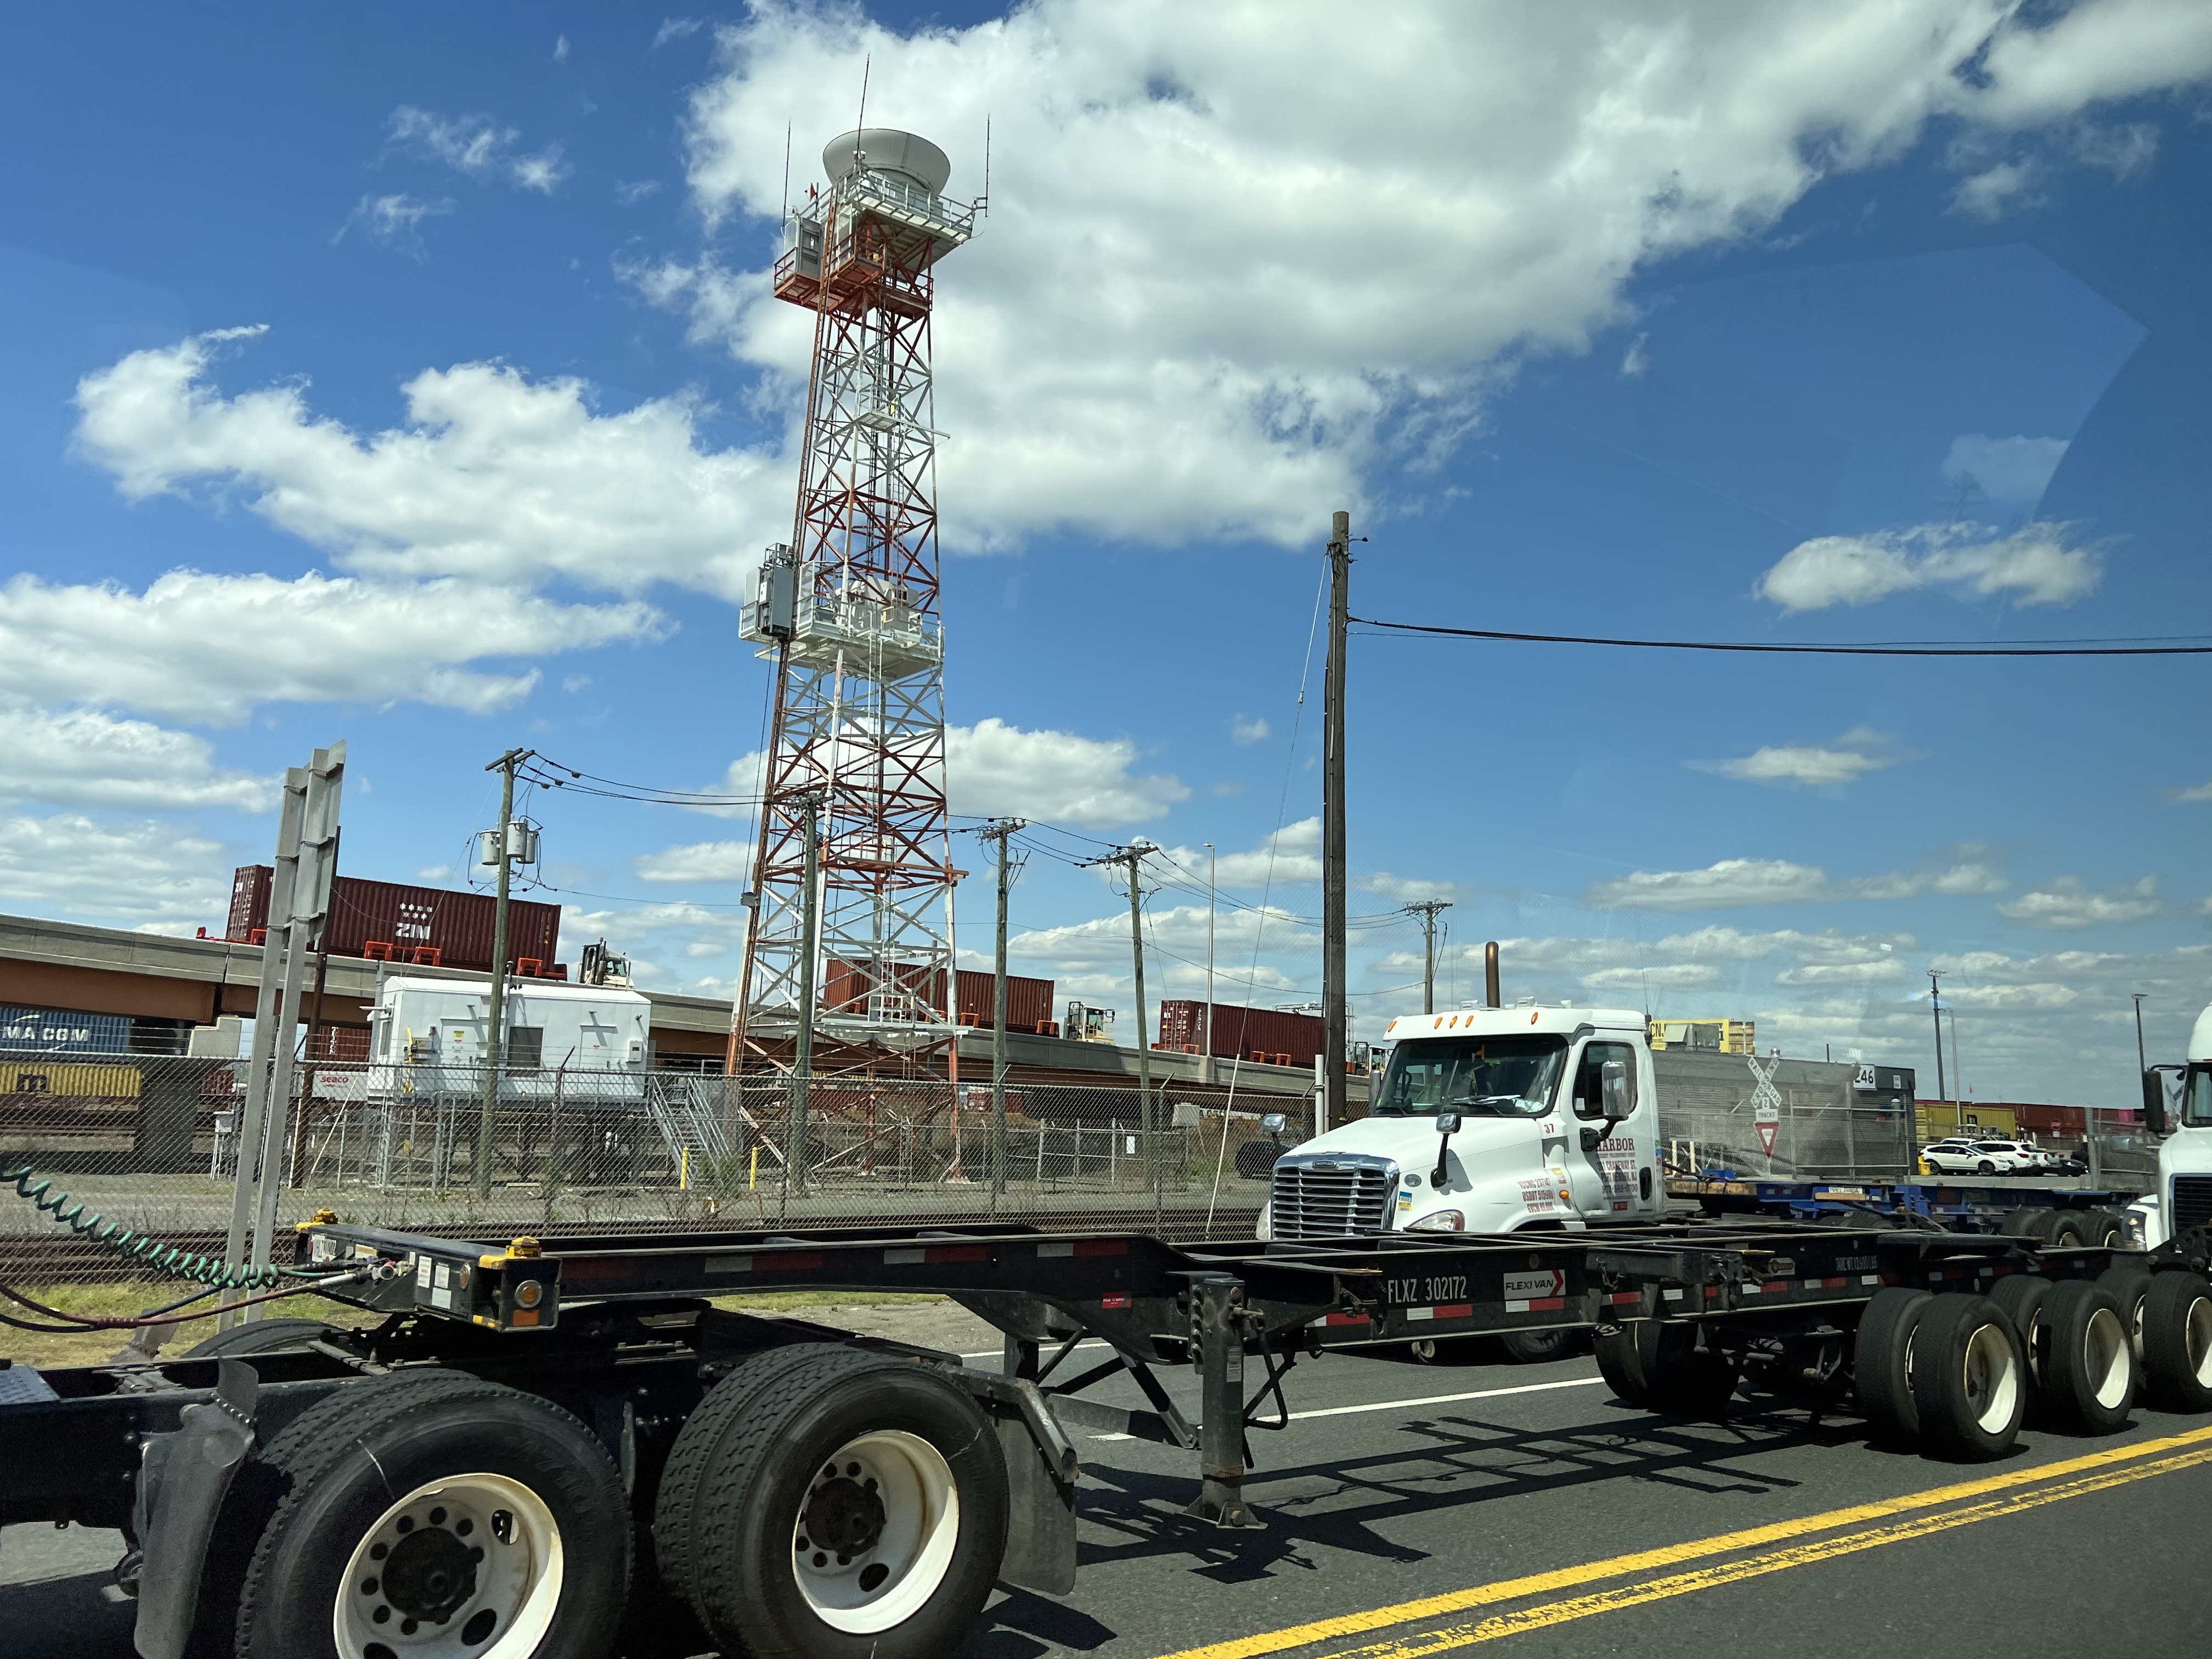 Image of Newark diesel truck traffic by Tolani Taylor